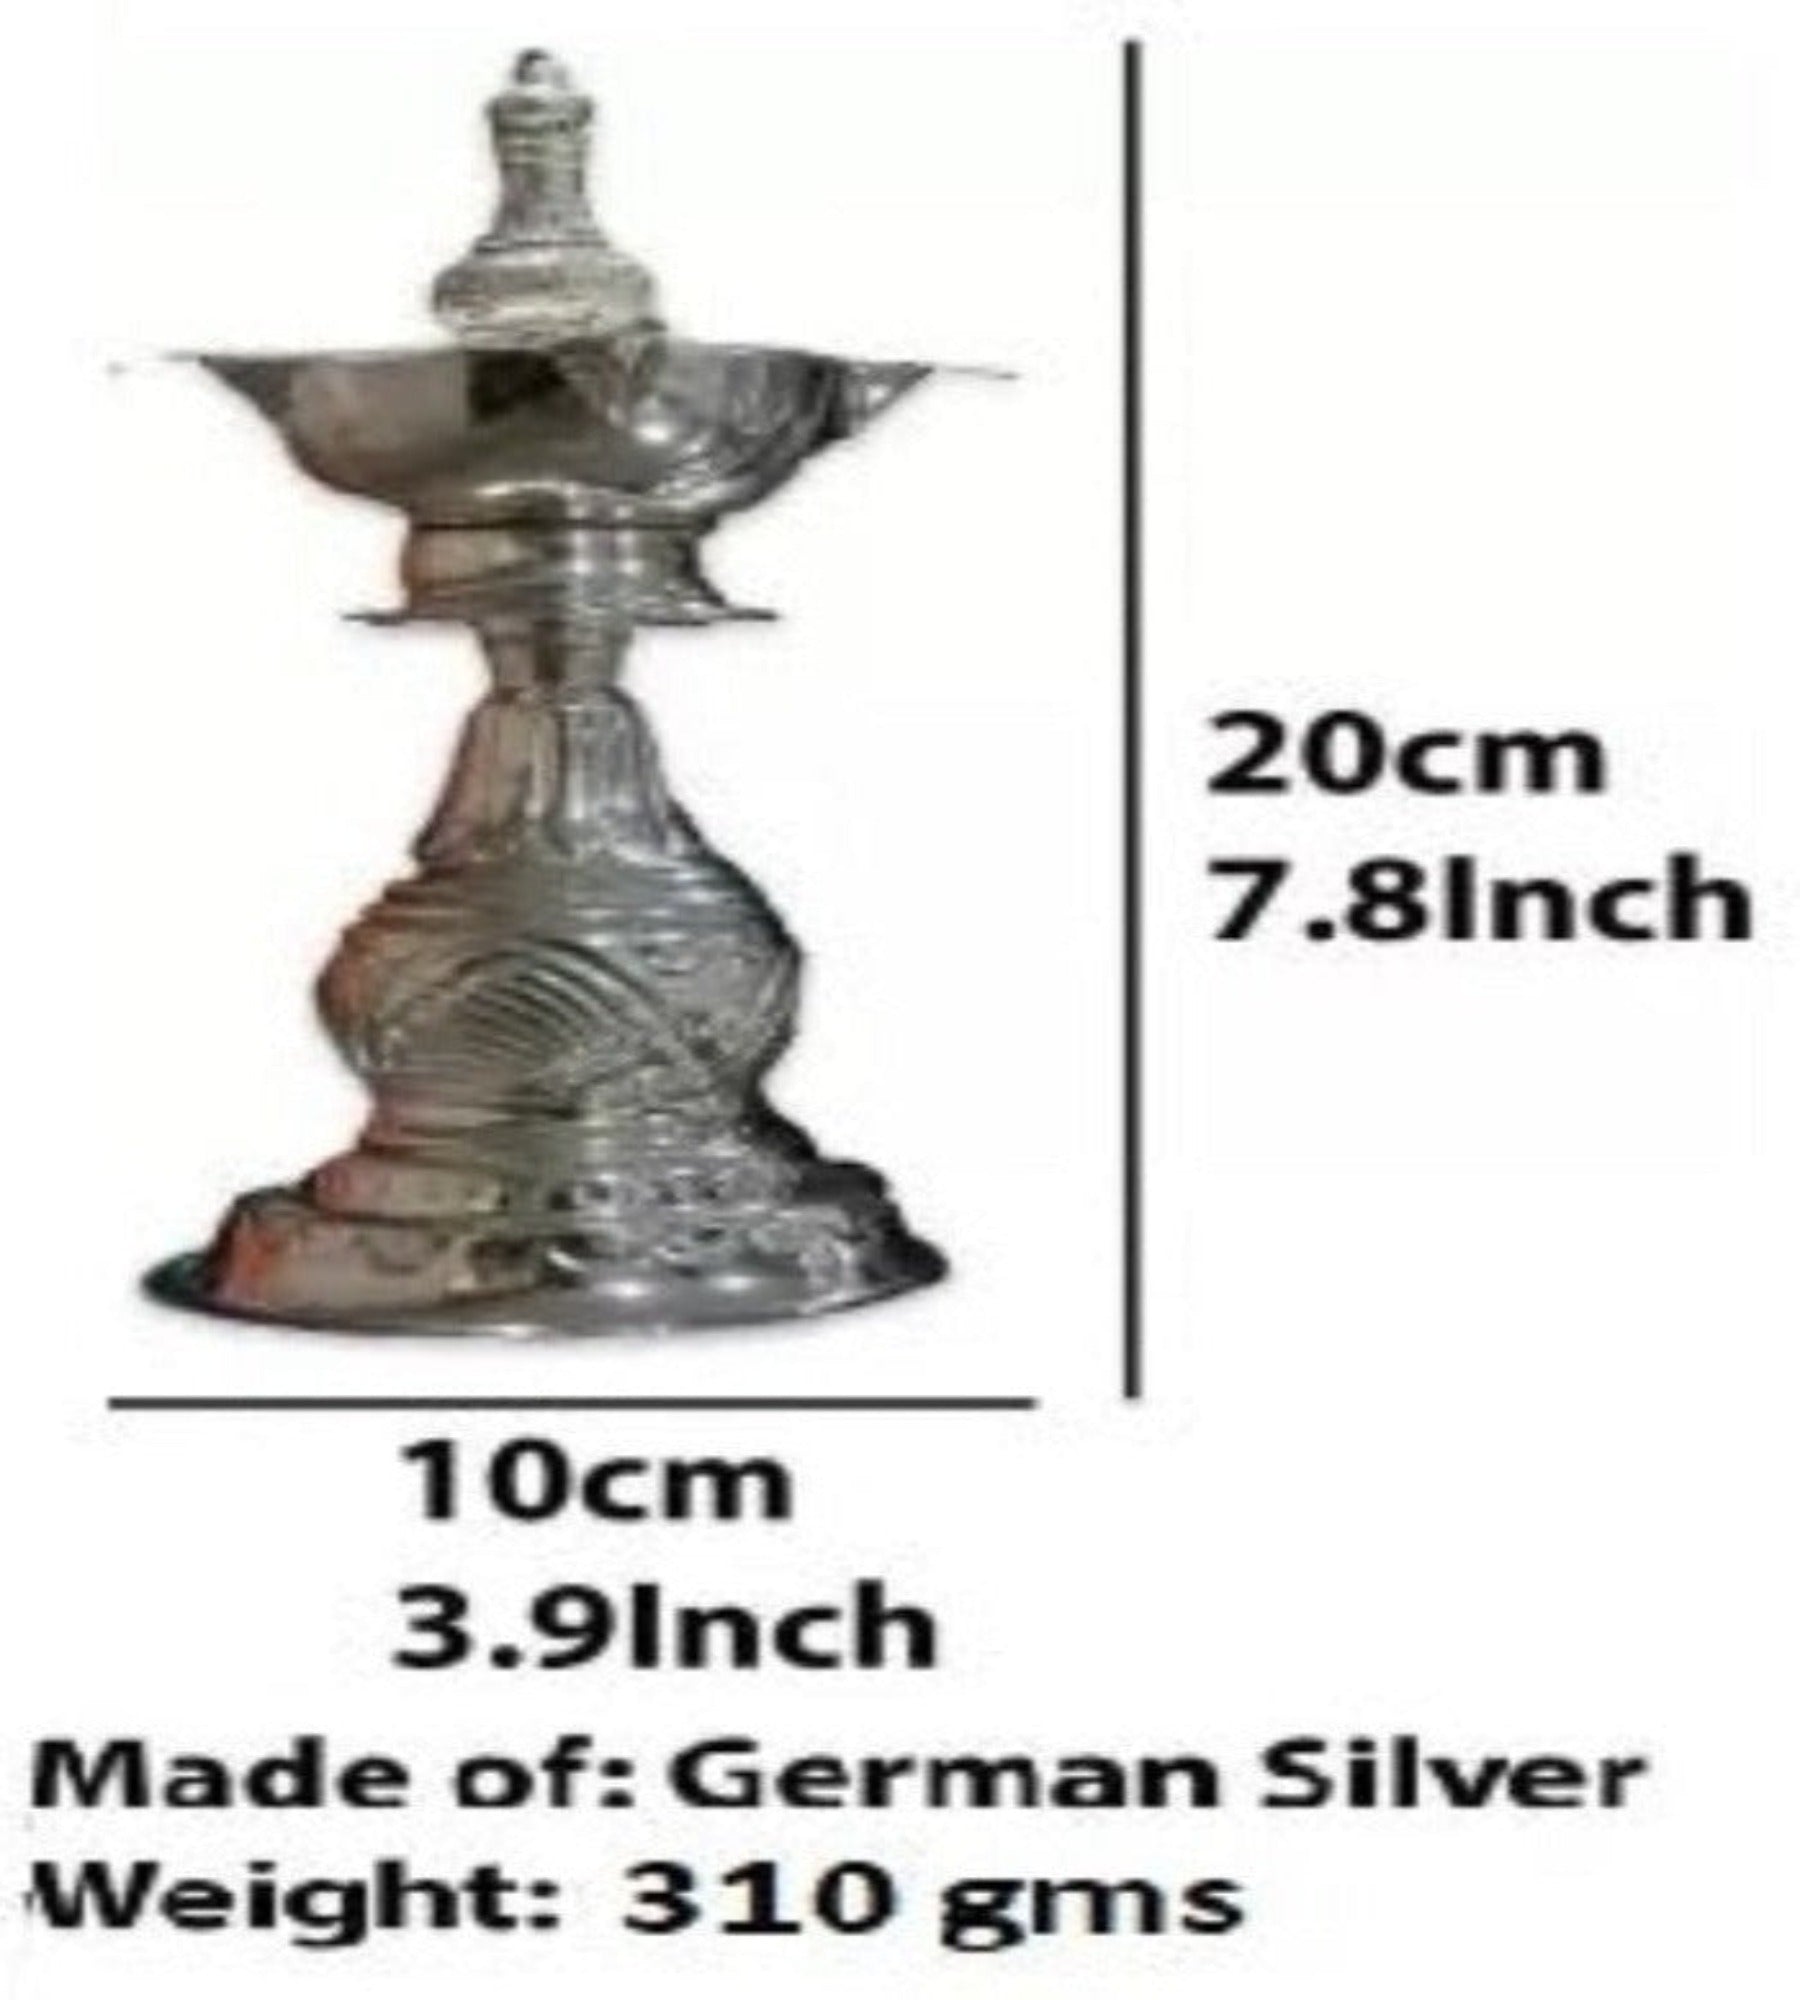 2 German Silver Diya is best for Home, Office and Temple Poojas K3131